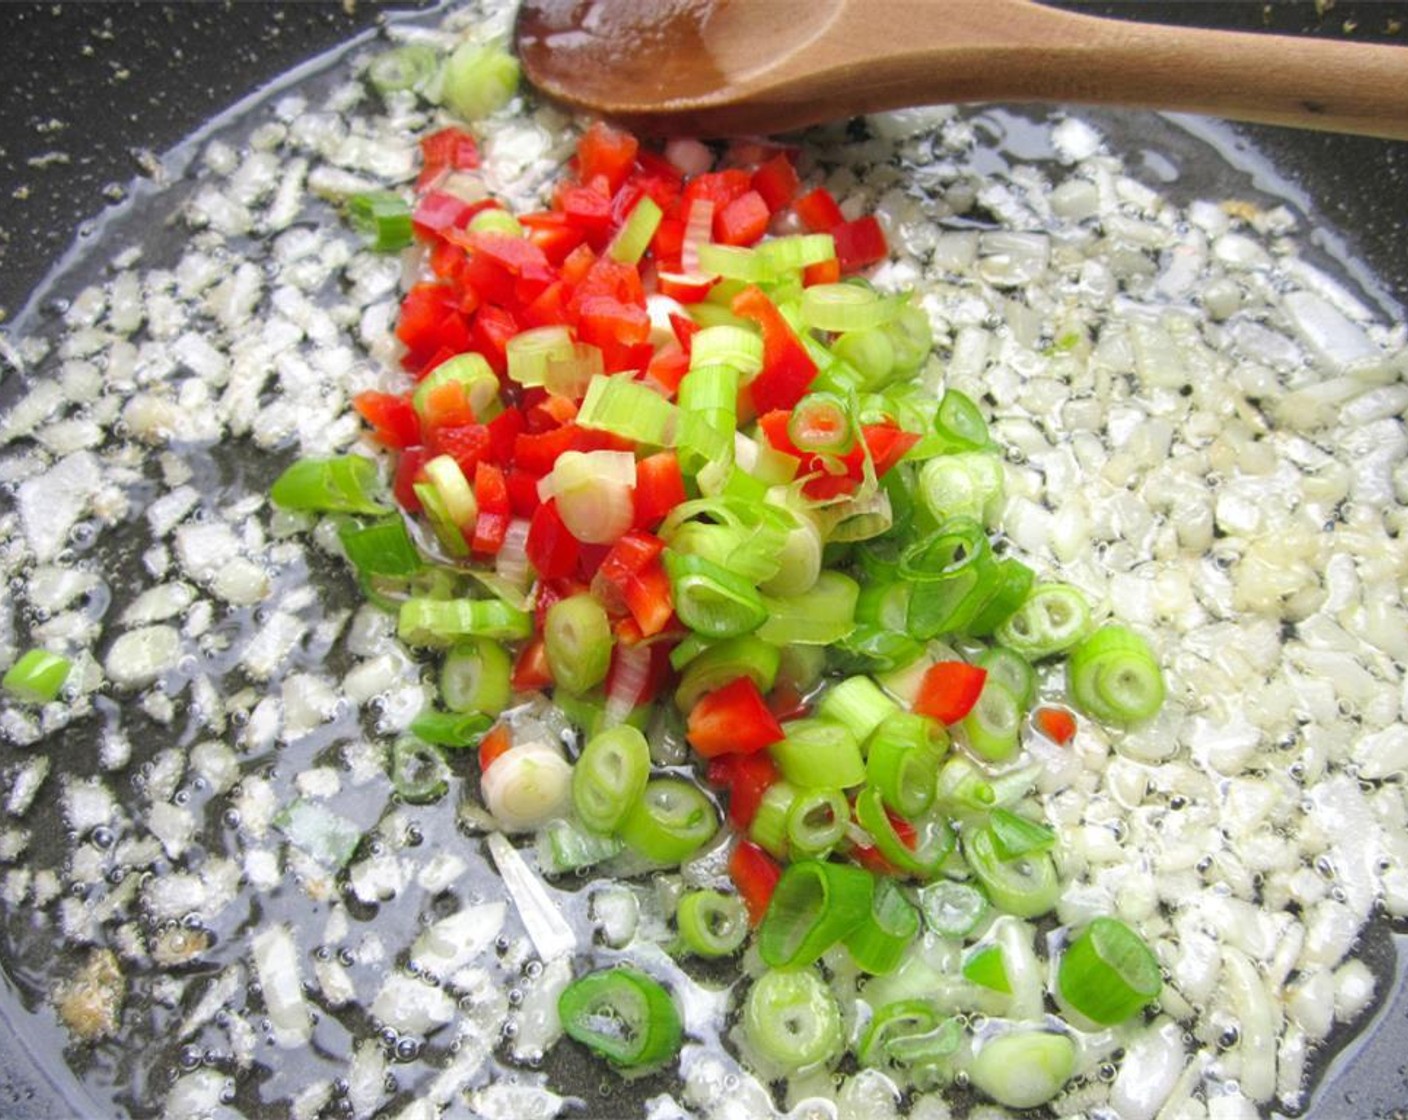 step 3 Once the diced white onion begins to soften, add the finely diced Scallion (1 bunch)  the diced Red Bell Pepper (1).